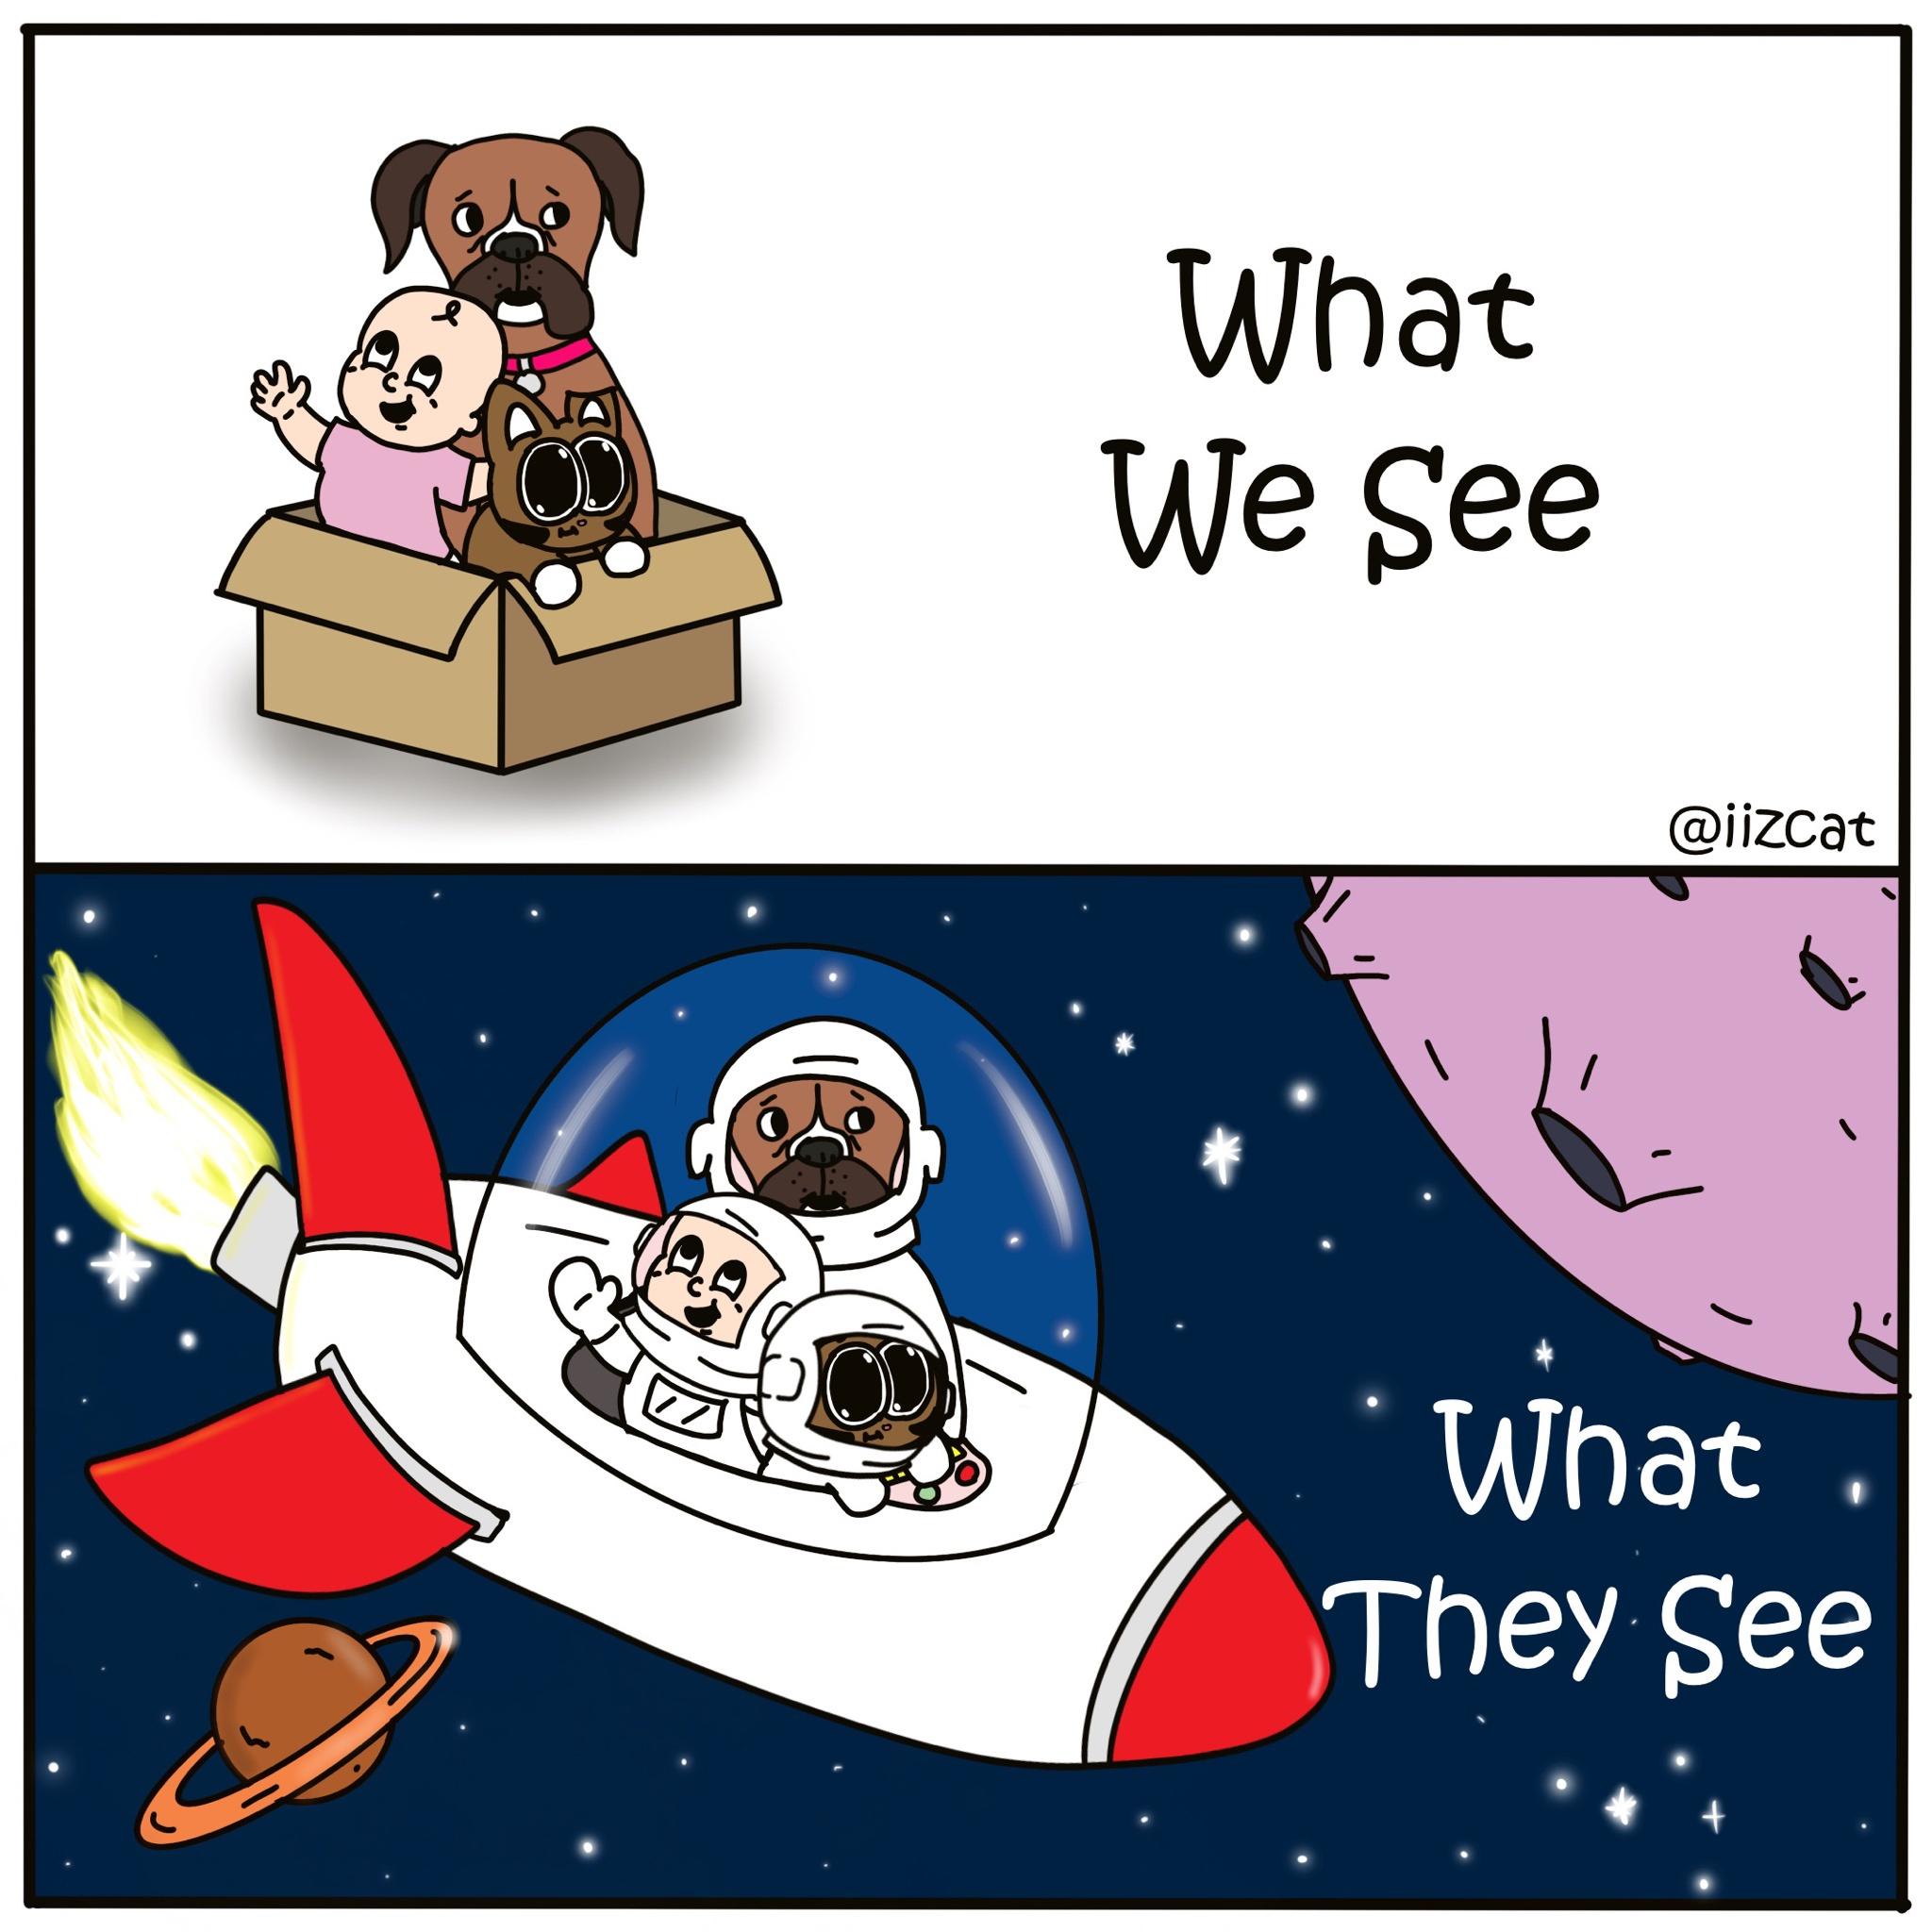 what we see vs what they see